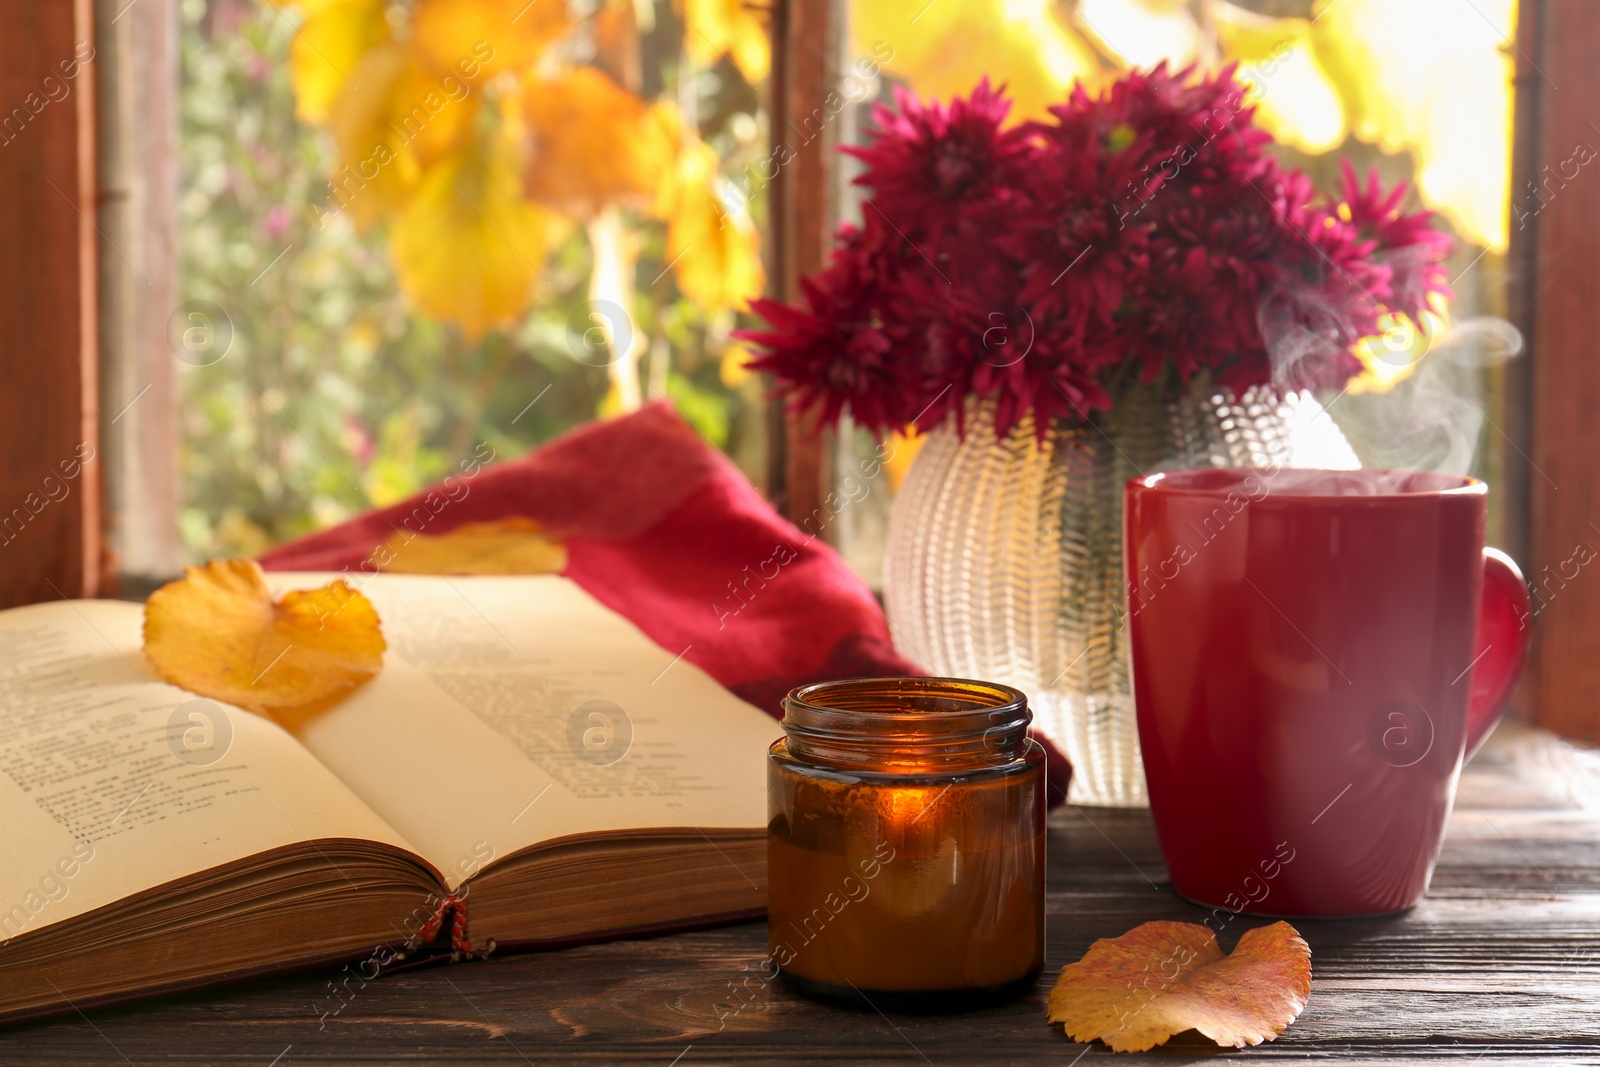 Photo of Beautiful chrysanthemum flowers, cup of hot drink and book on wooden table indoors. Autumn still life